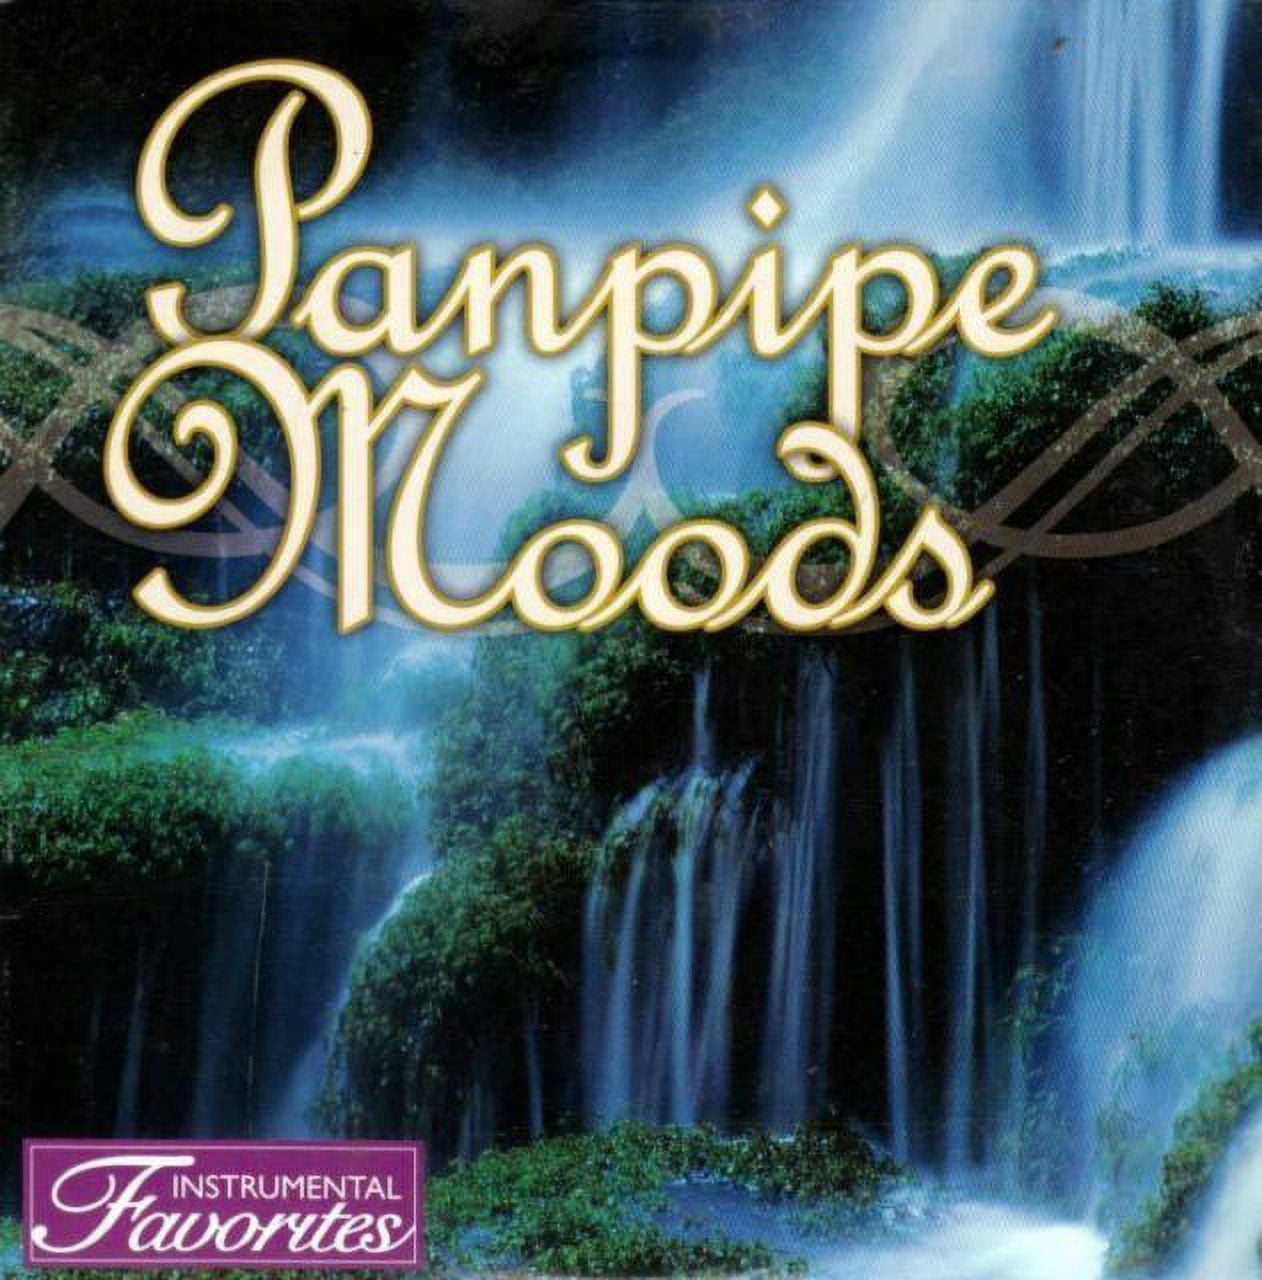 Pre-Owned - Panpipe Moods [Columbia River] by Various Artists (CD, May-2005, Allegro Corporation (Distributor US)